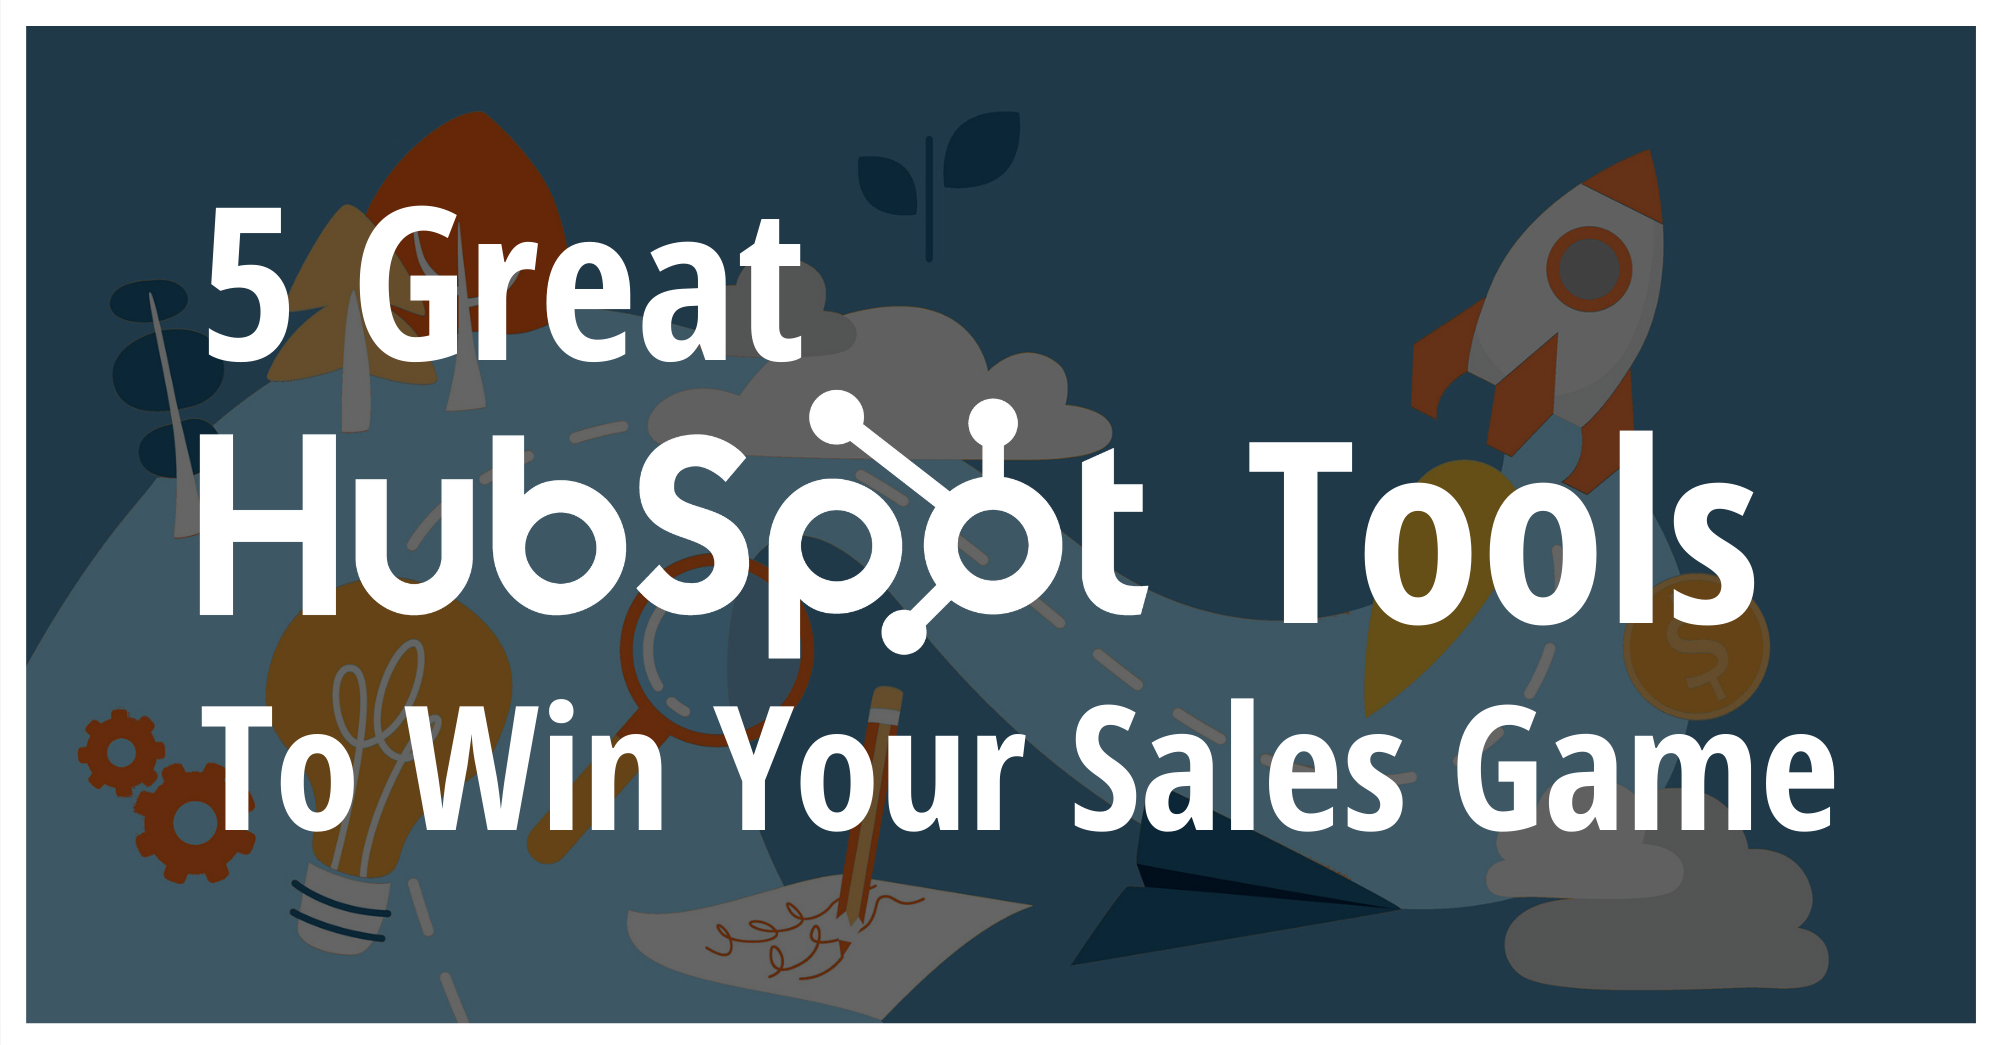 _5 great HubSpot tools to win your sales game